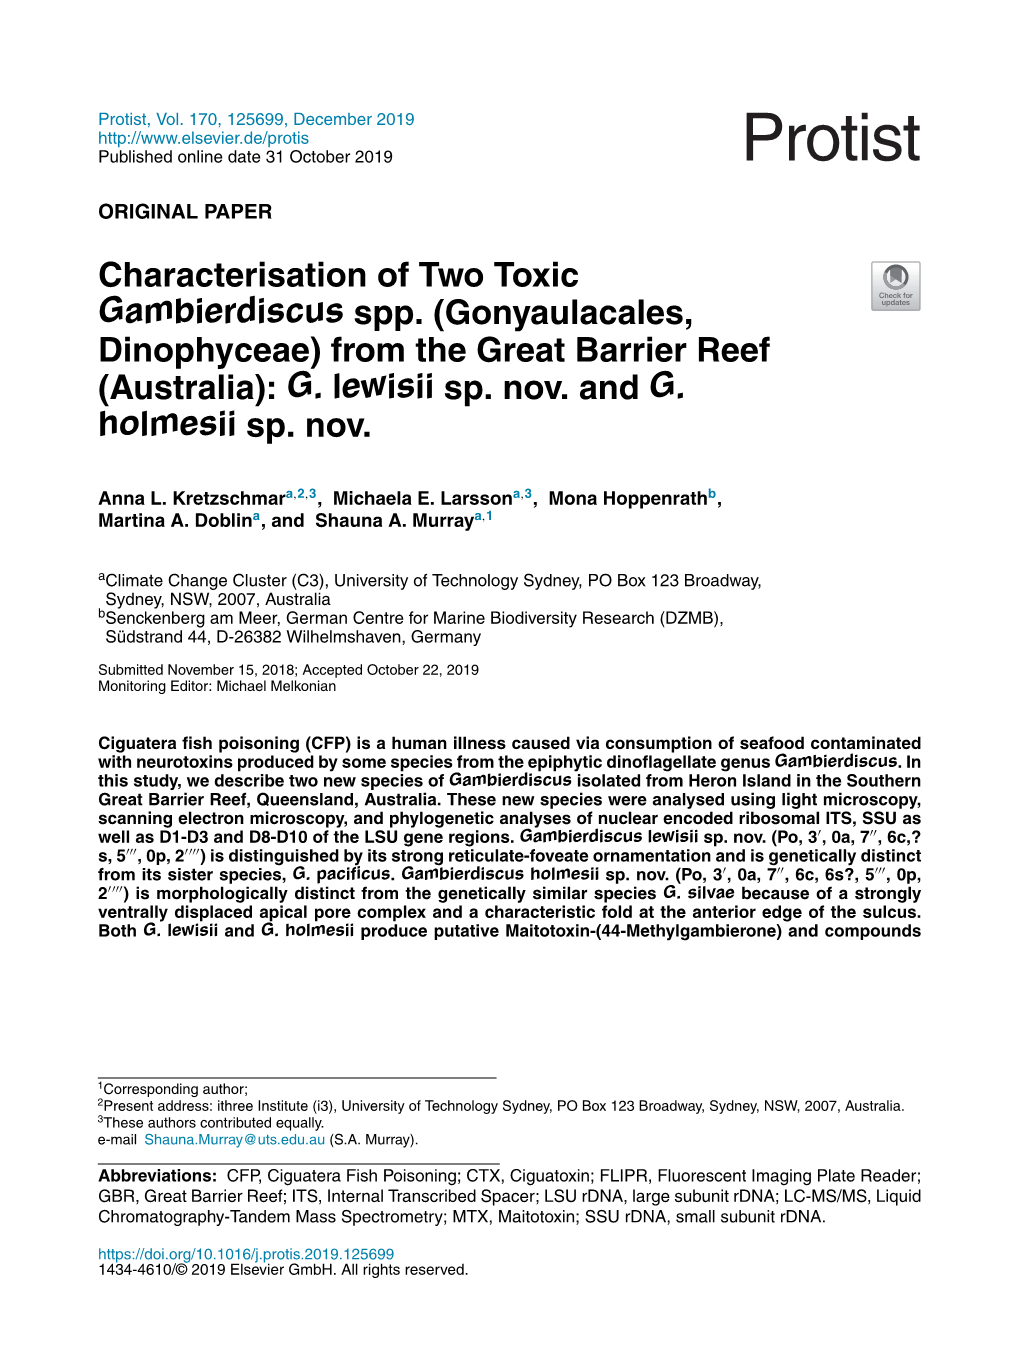 Characterisation of Two Toxic Gambierdiscus Spp. (Gonyaulacales, Dinophyceae) from the Great Barrier Reef (Australia): G. Lewisi